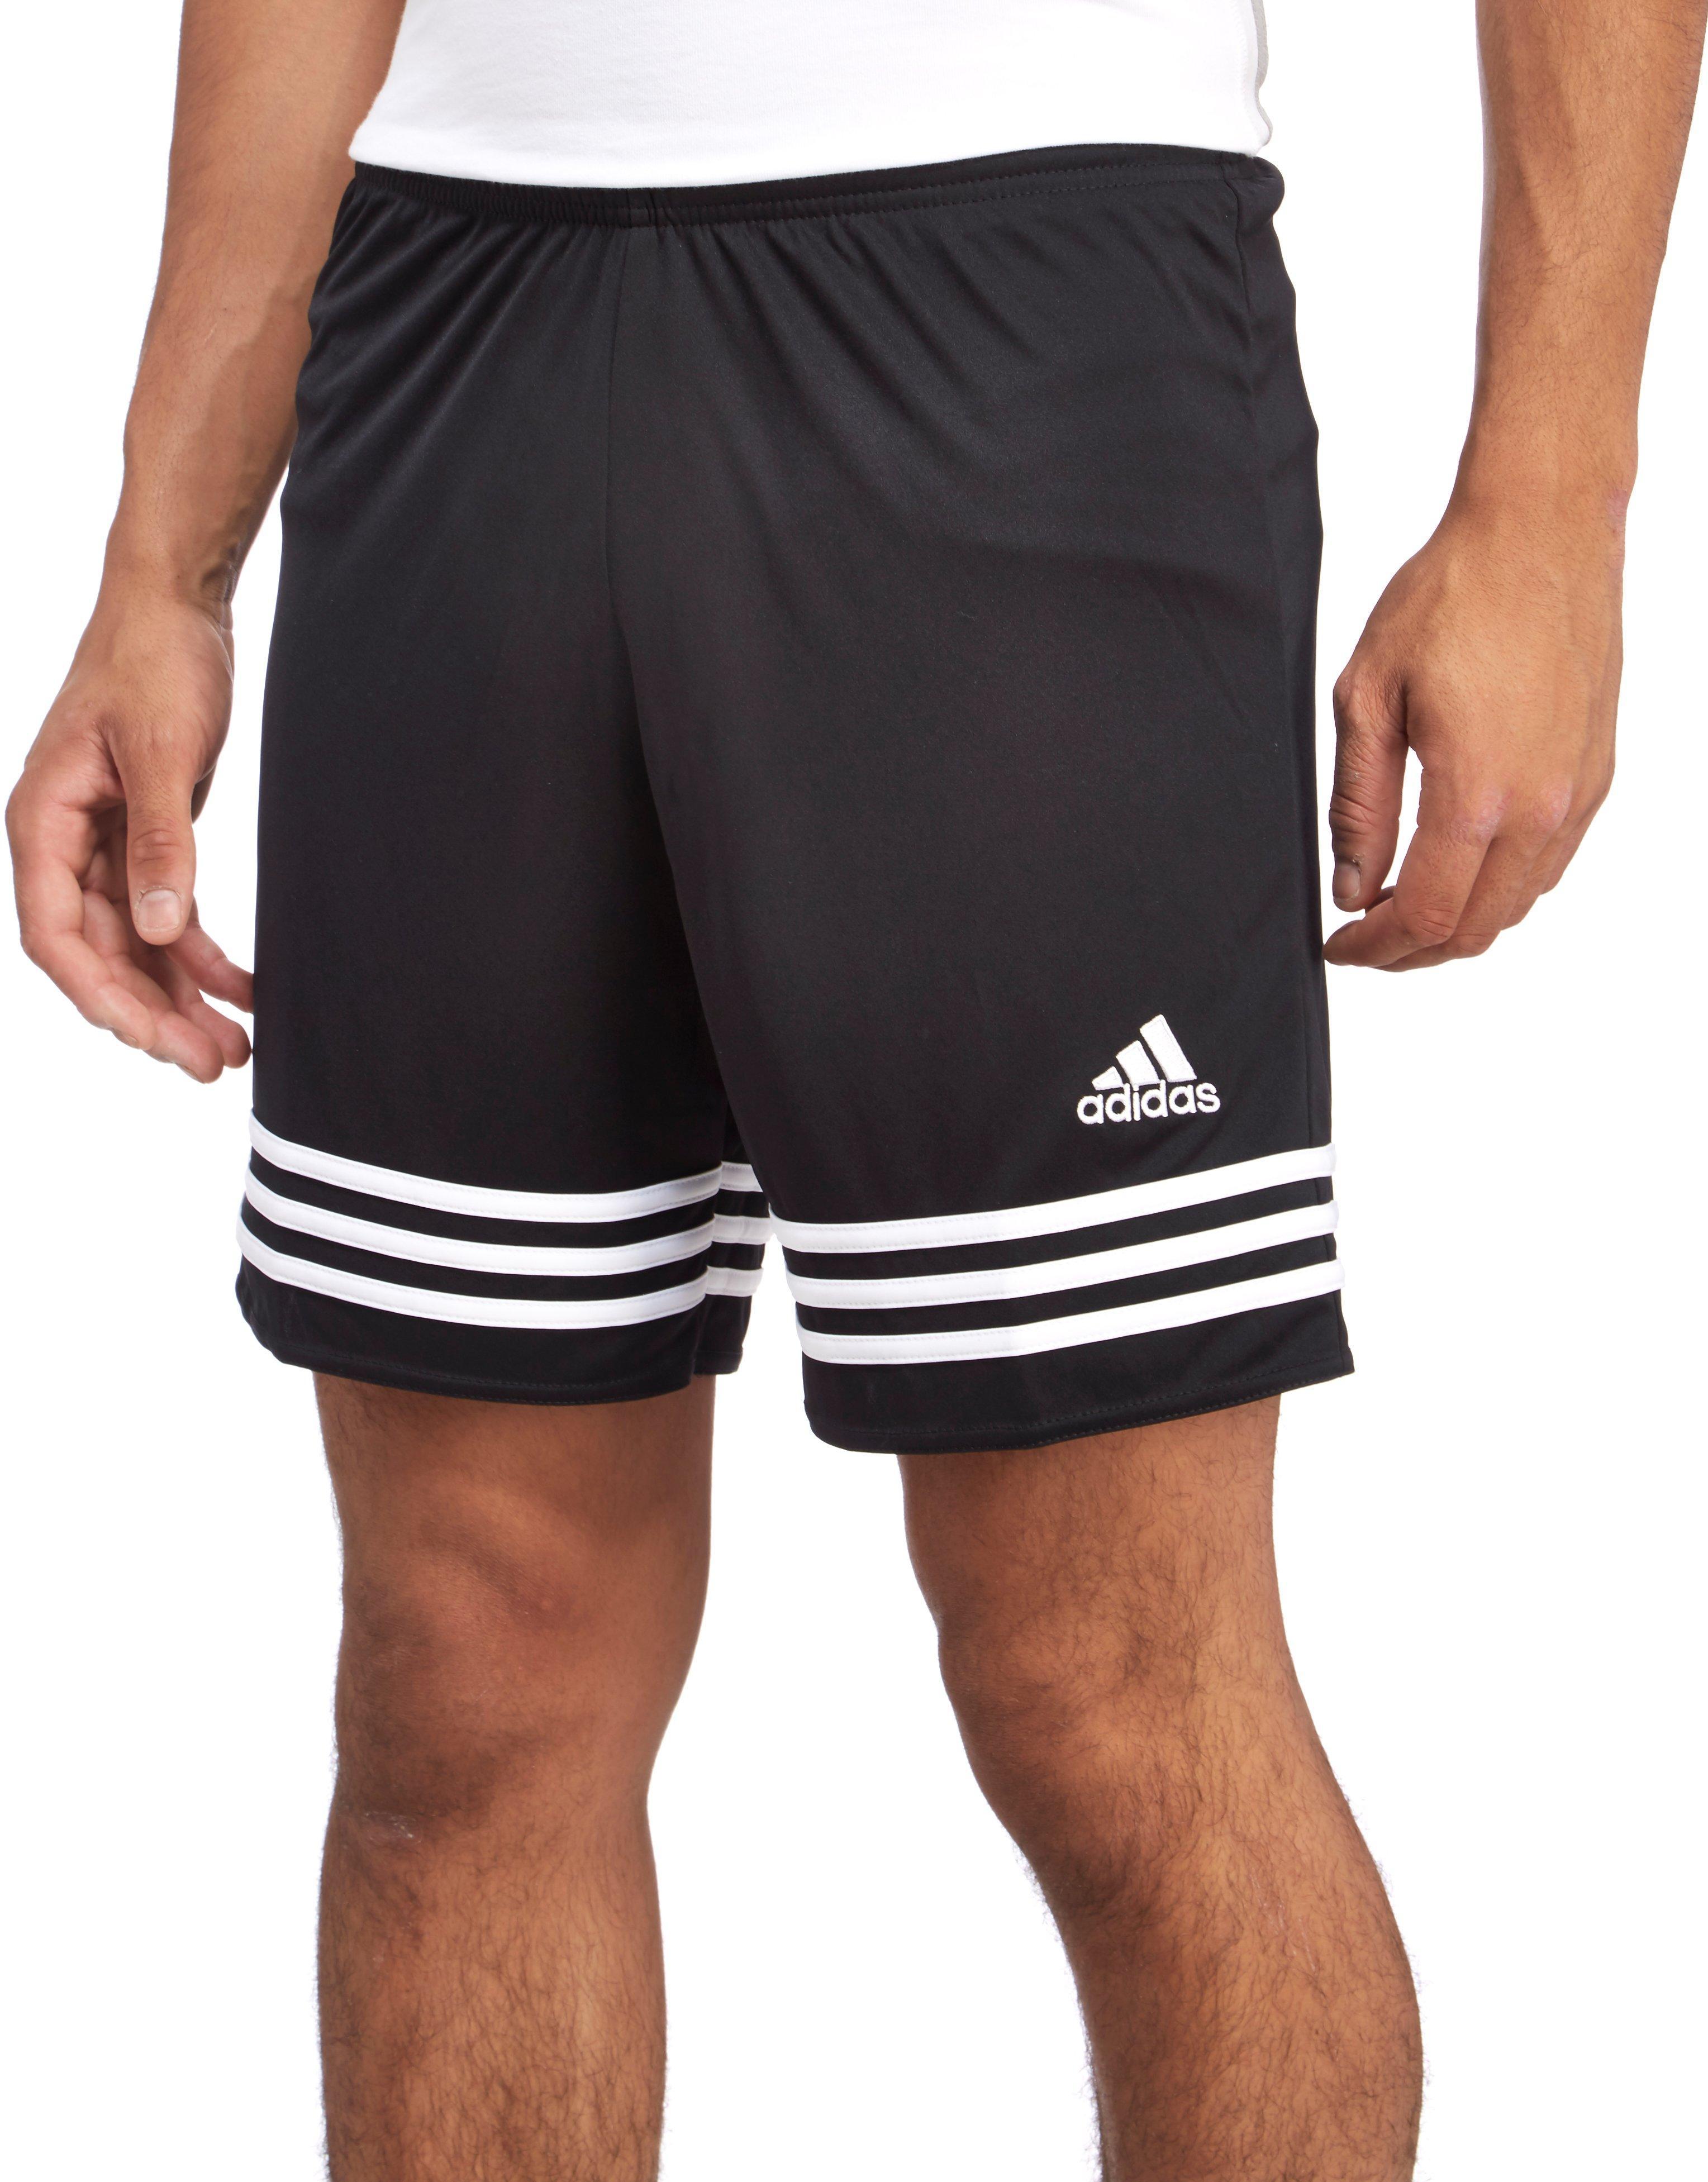 adidas Synthetic Entrada Poly Shorts in Black for Men - Lyst